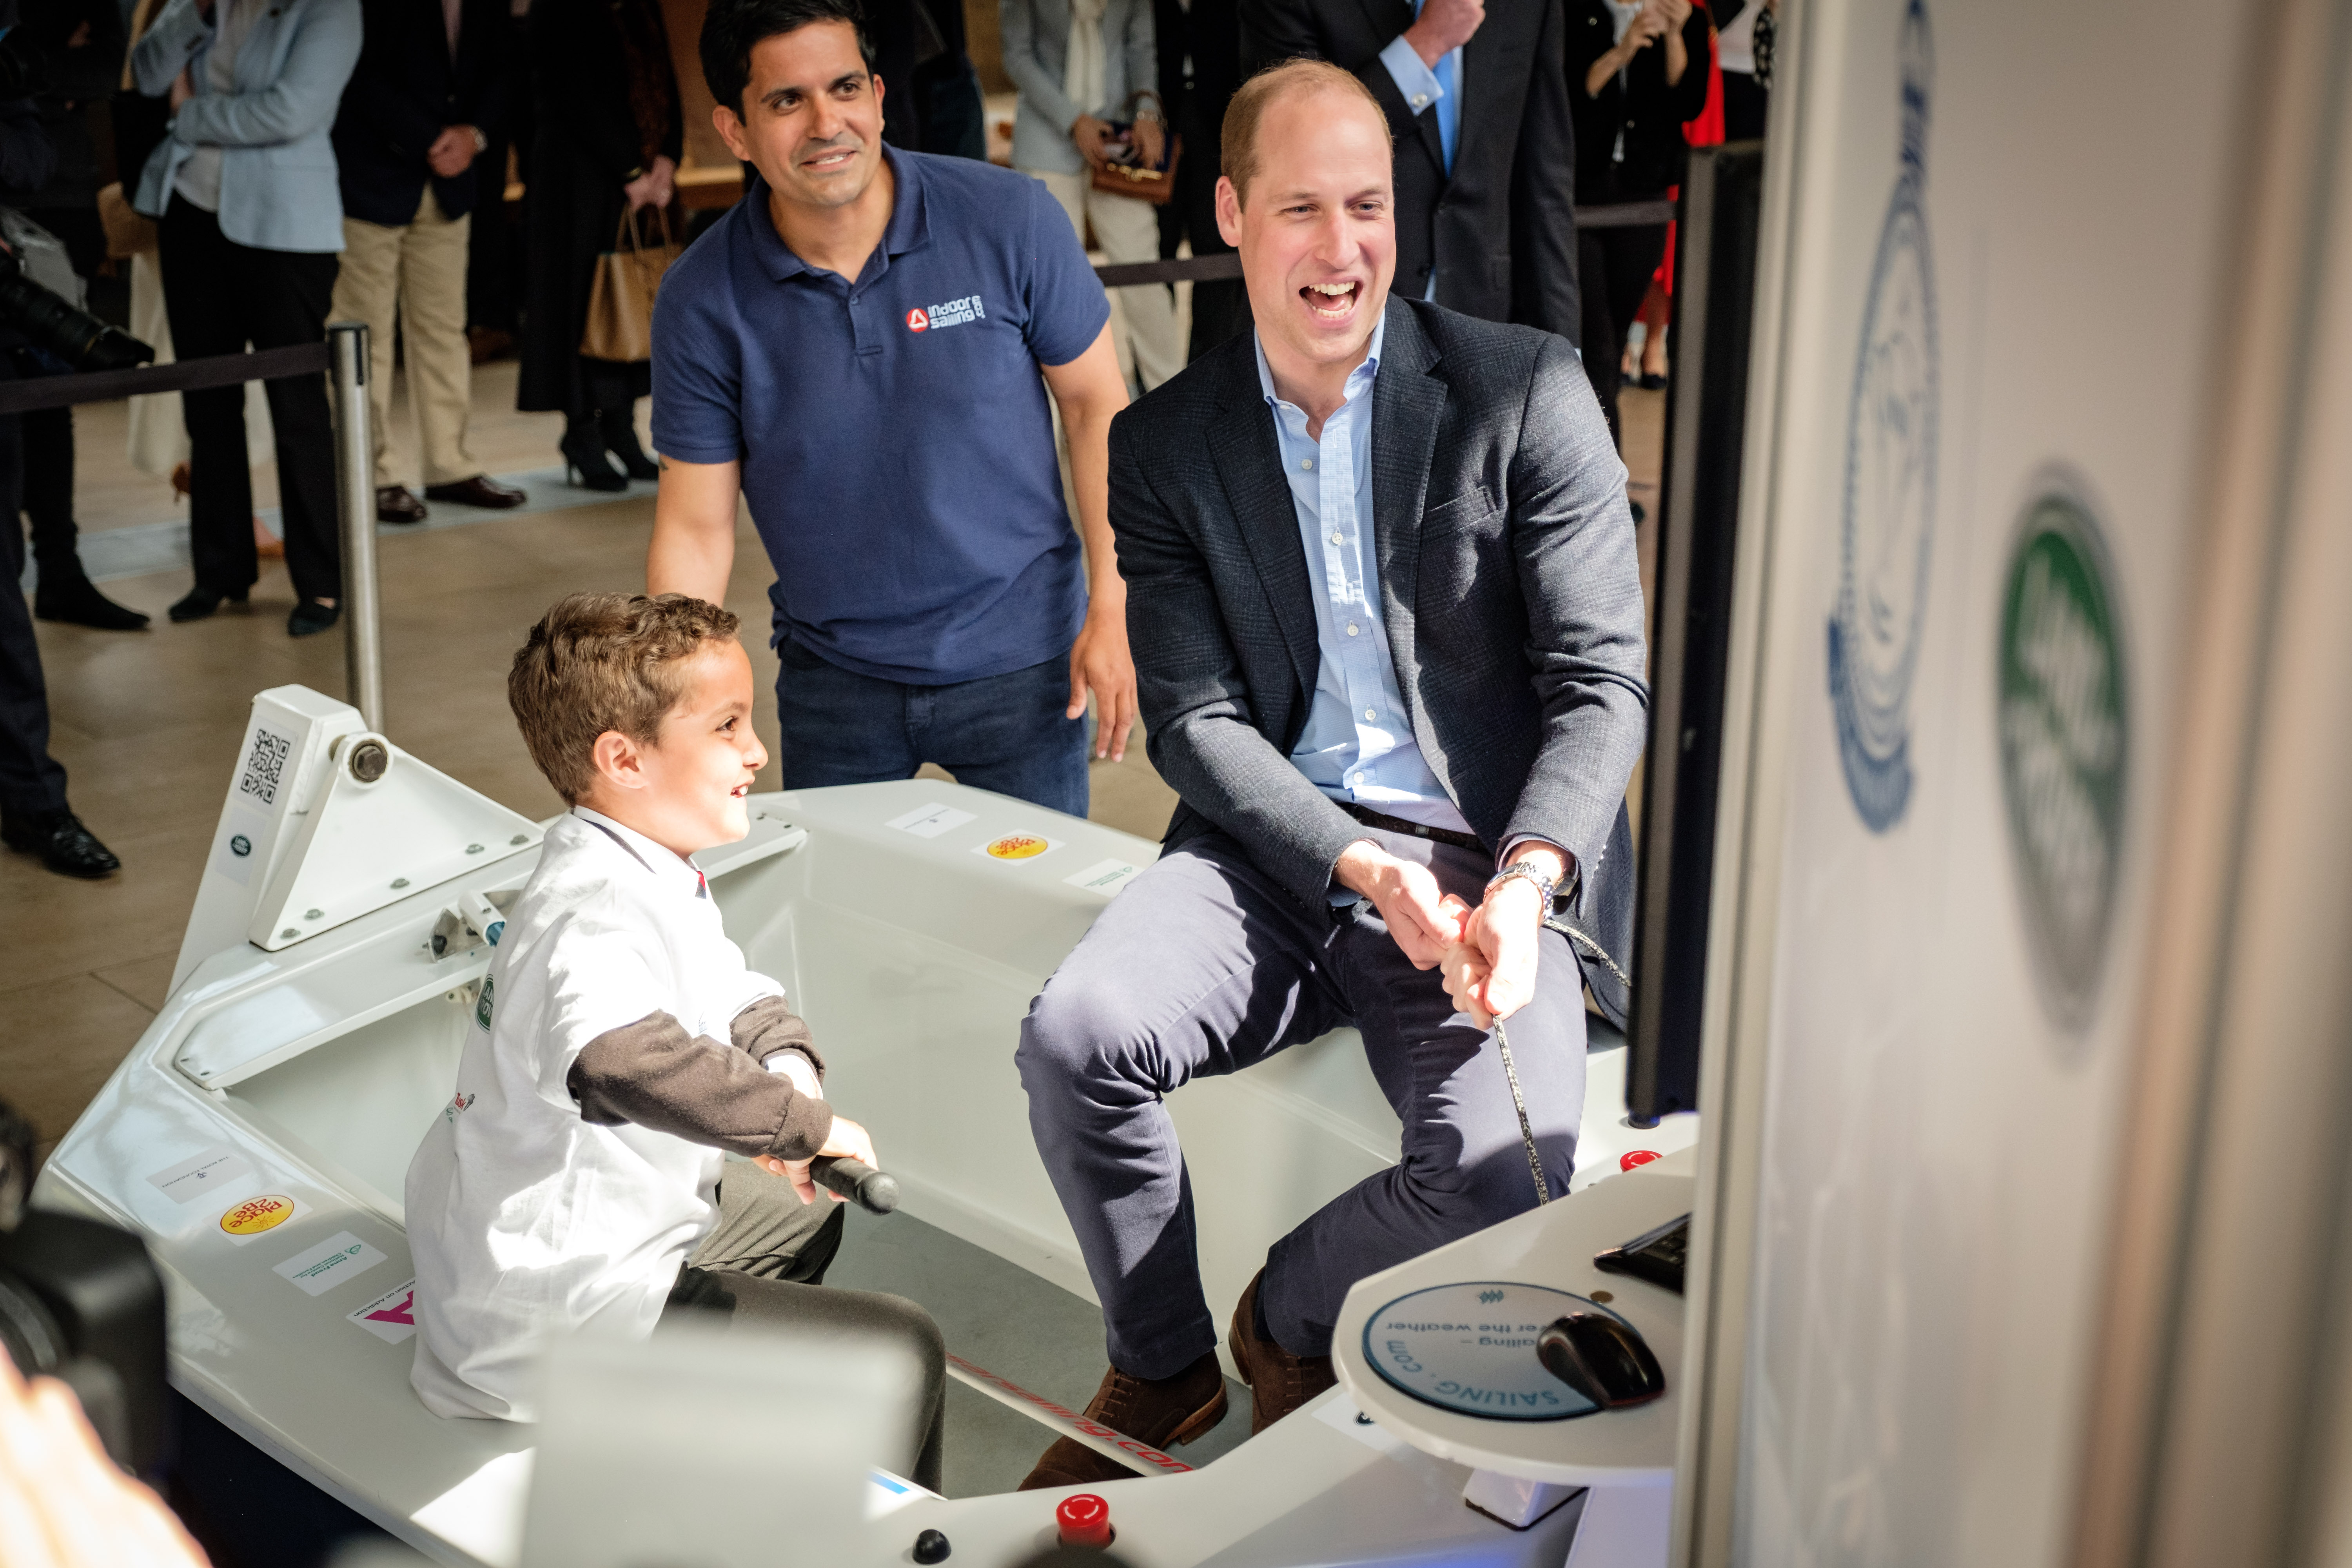 The Duke of Cambridge at the King's Cup launch